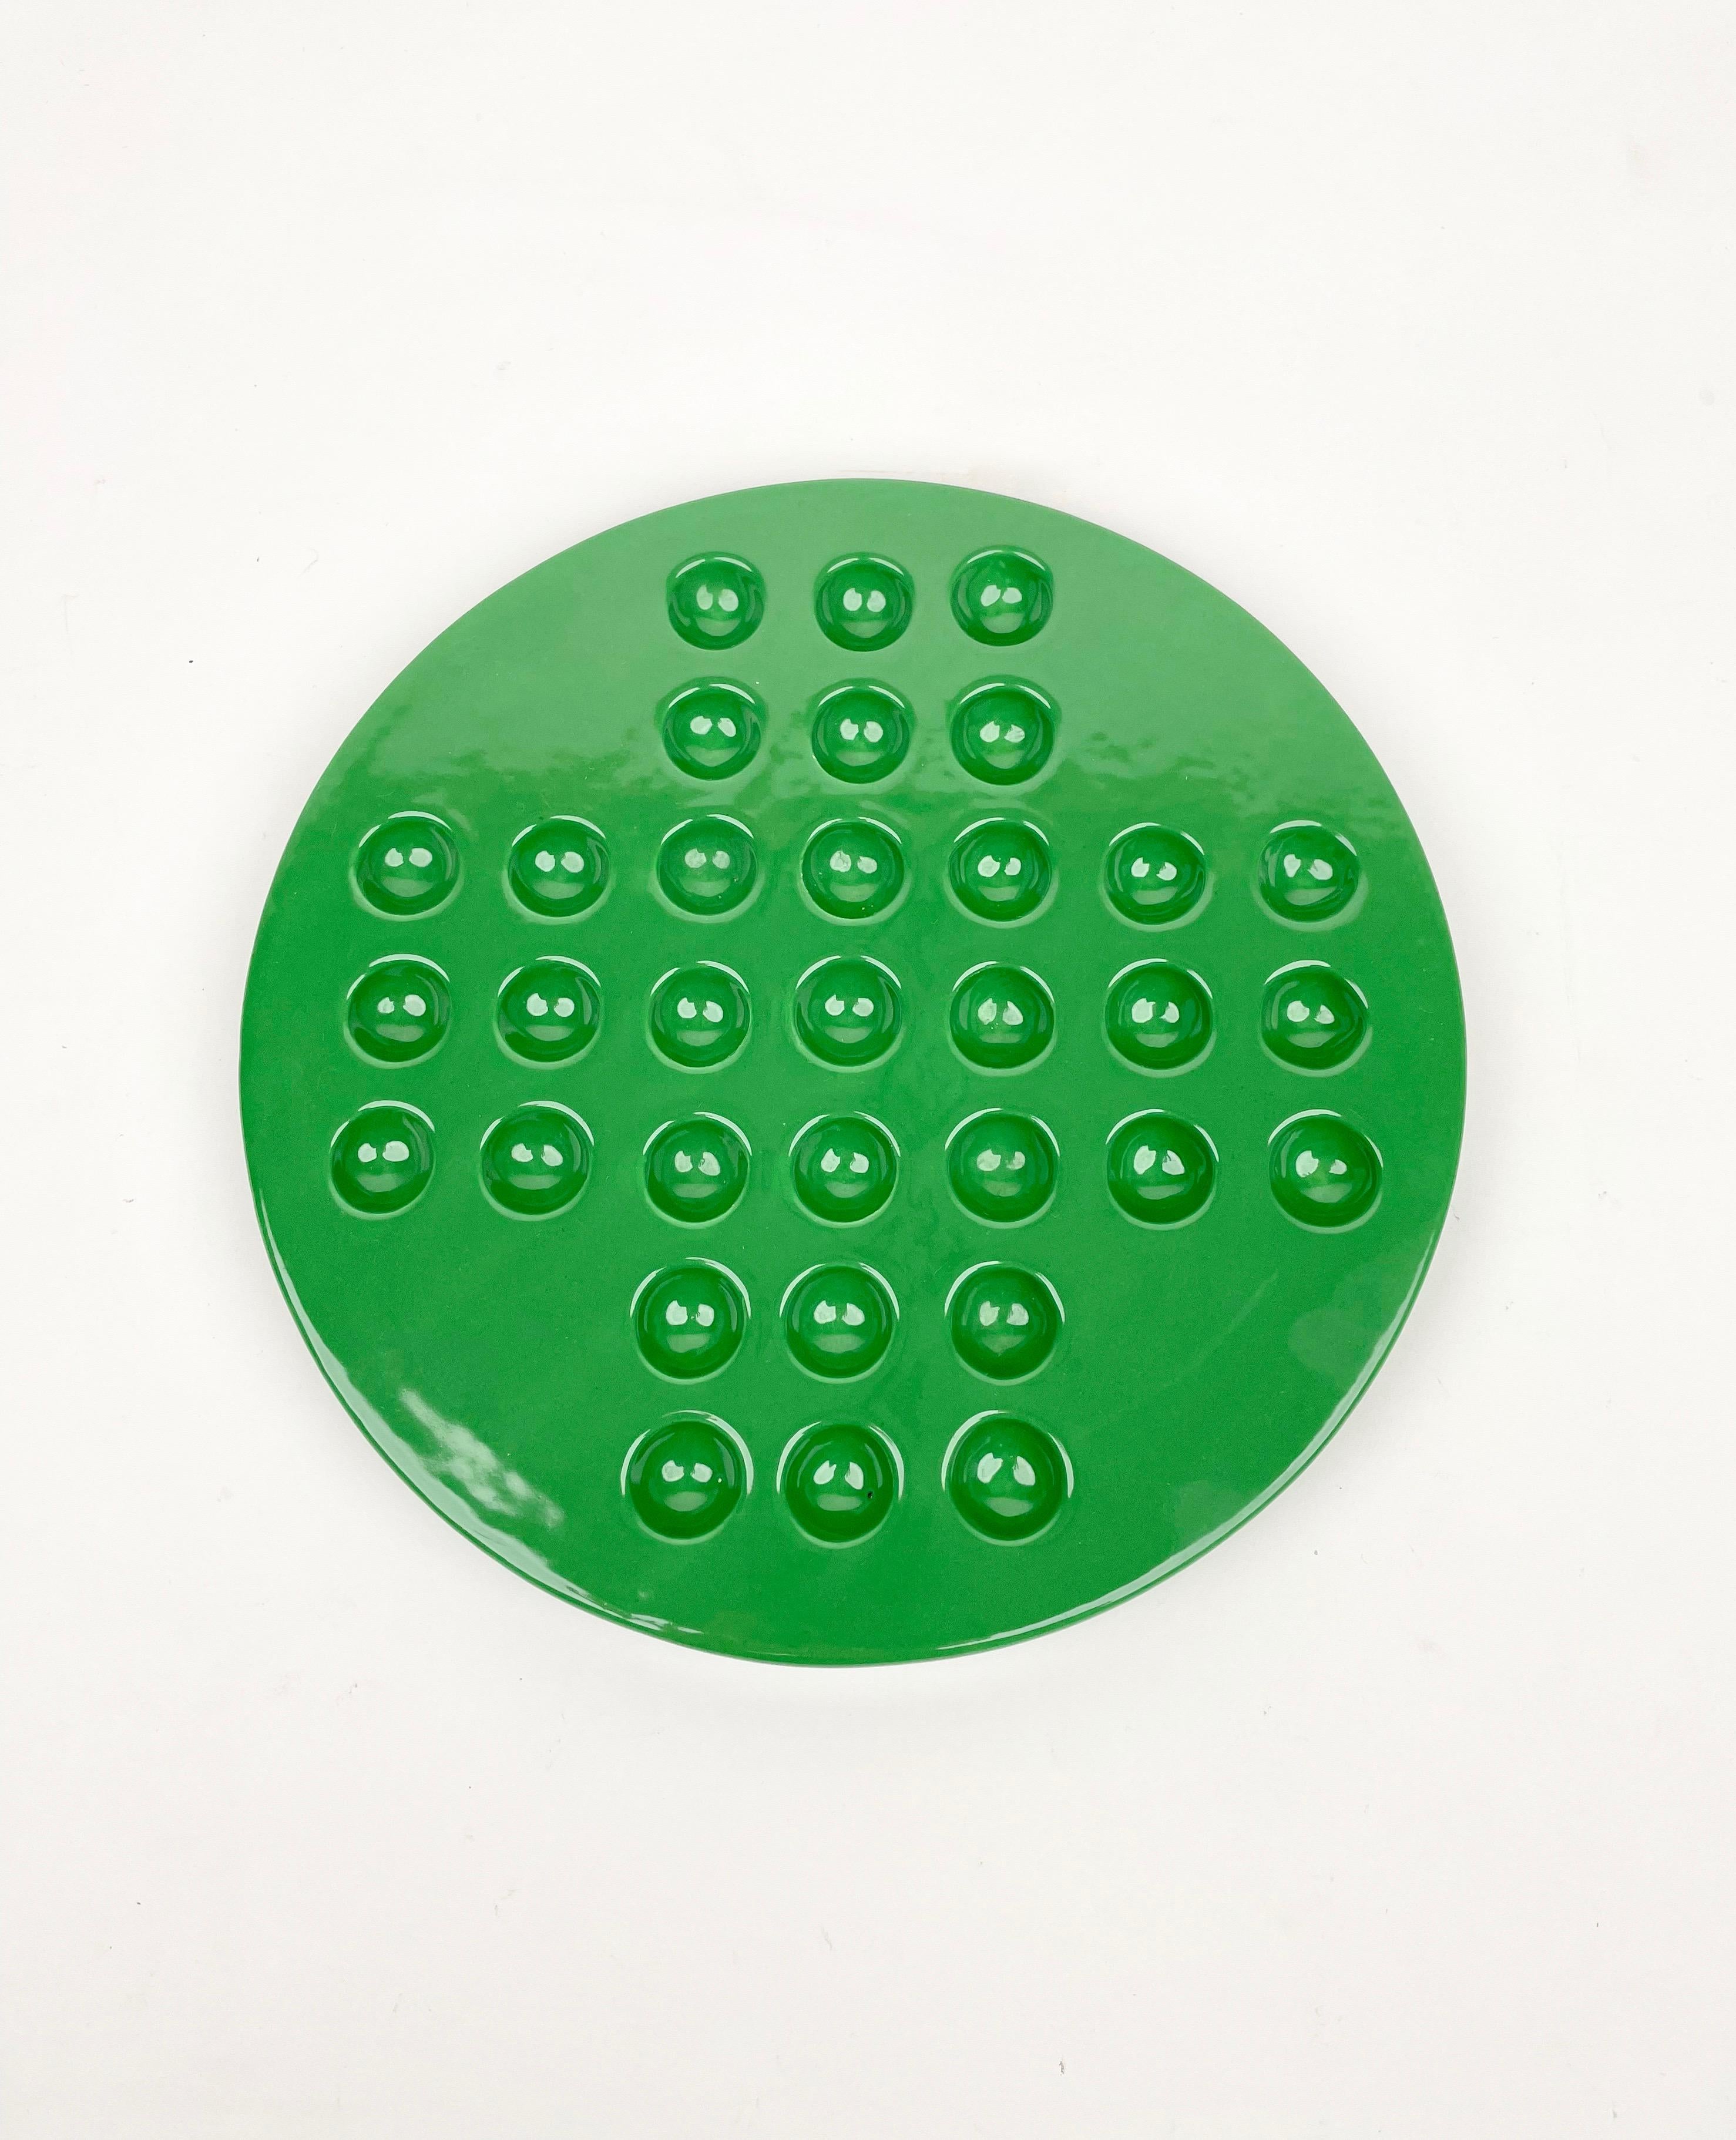 Checkers Game by Ennio Lucini for Gabbianelli Green & White Ceramic, Italy 1970s For Sale 4